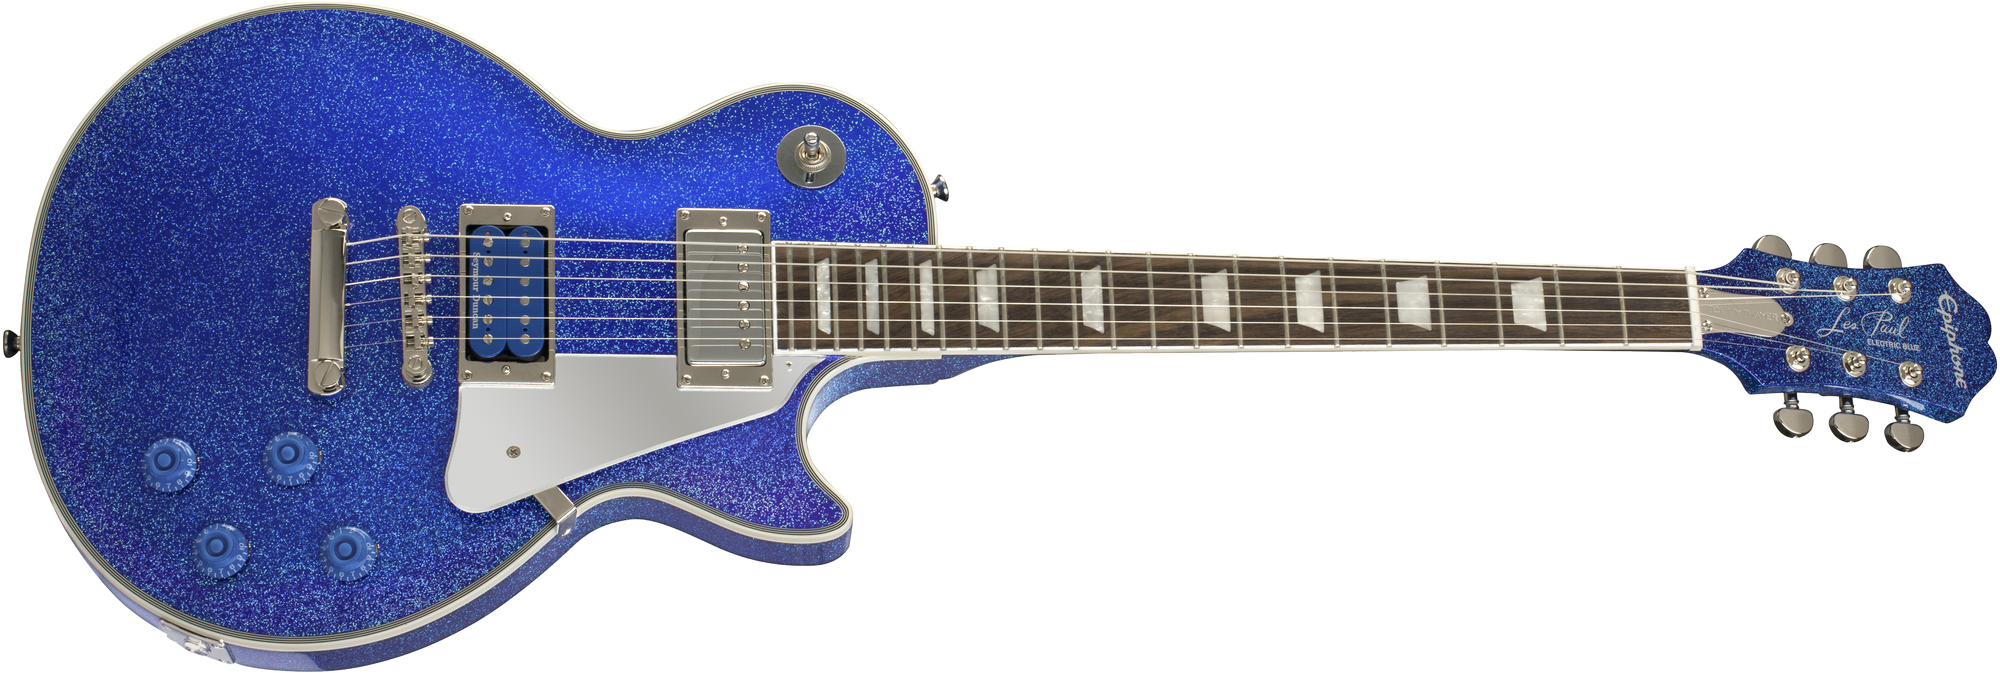 Epiphone Tommy Thayer Electric Blue El-Guitar